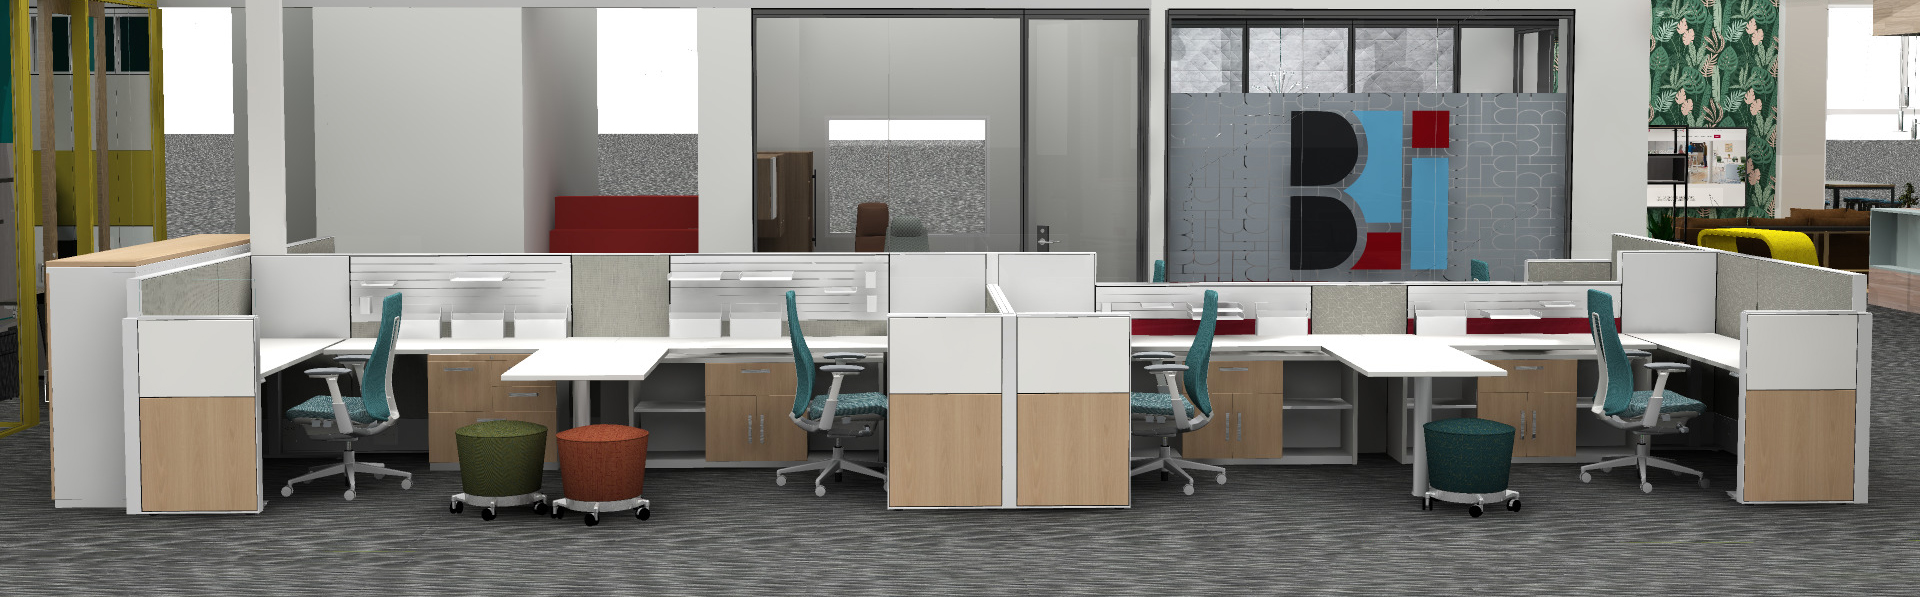 A rendering of our reconfigured office layout, with our workstations moved to the opposite side of the showroom.